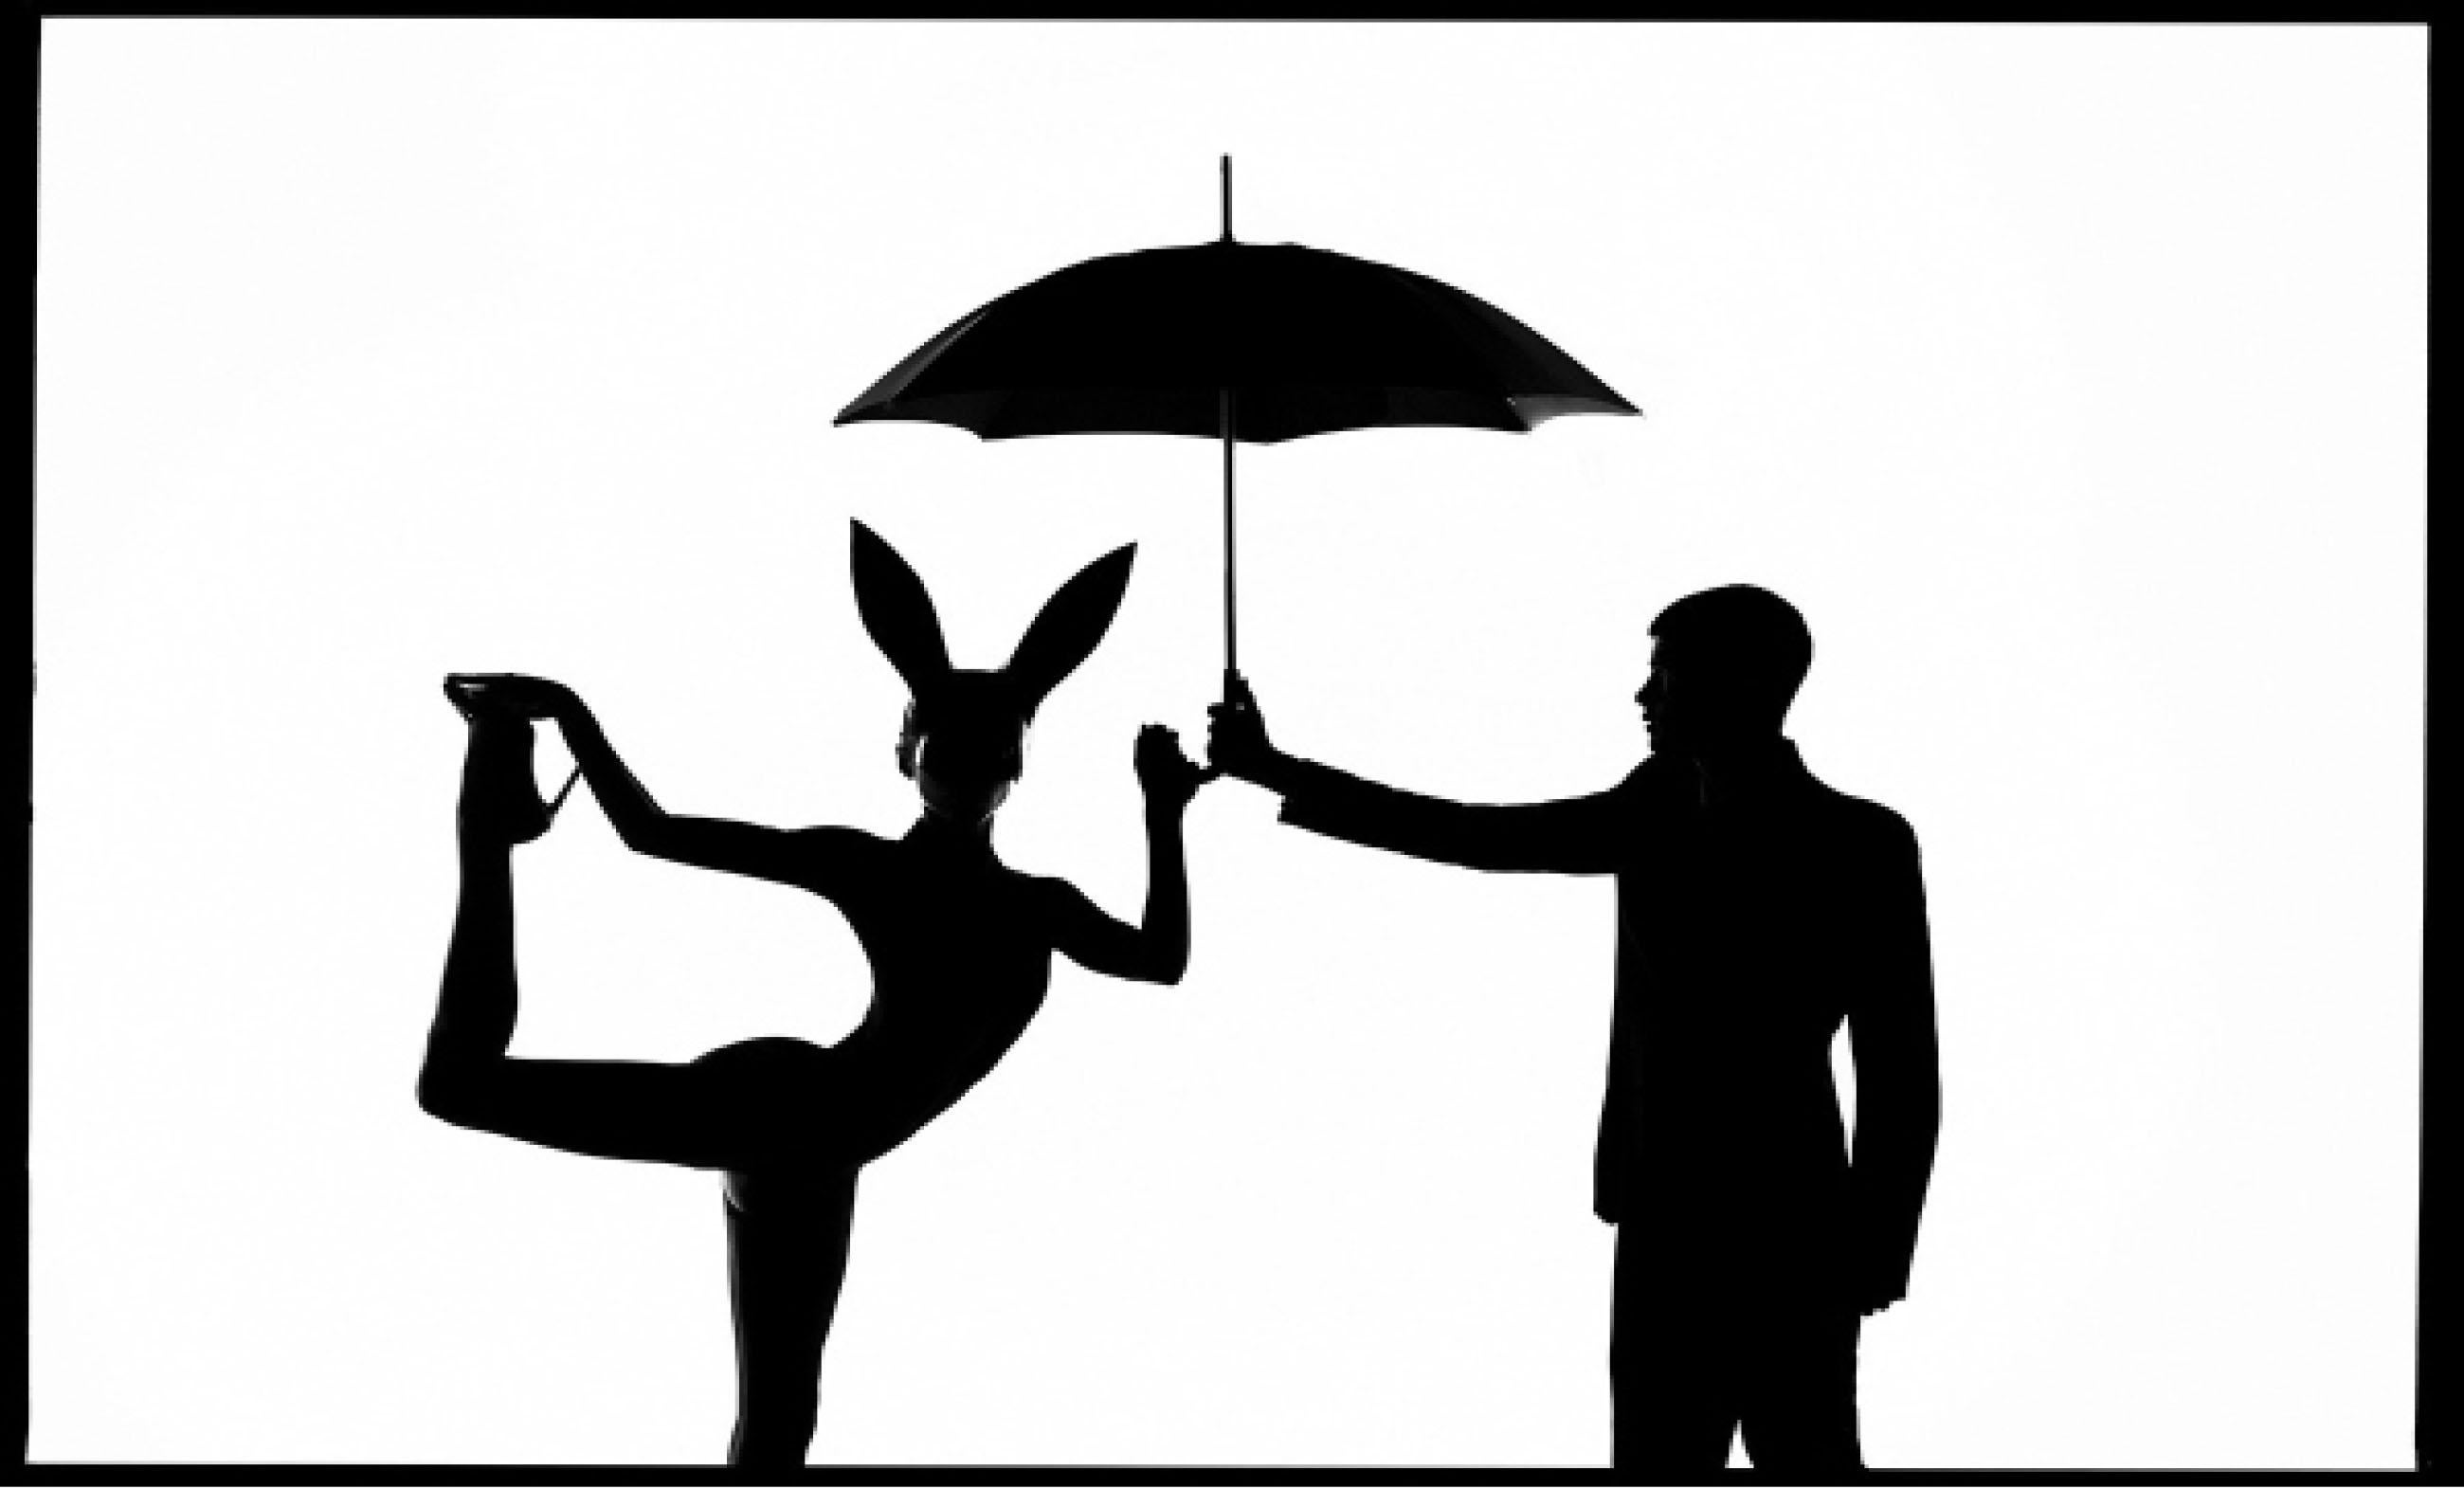 Tyler Shields - The Bunny and the Man, Photographie 2020, Printed After